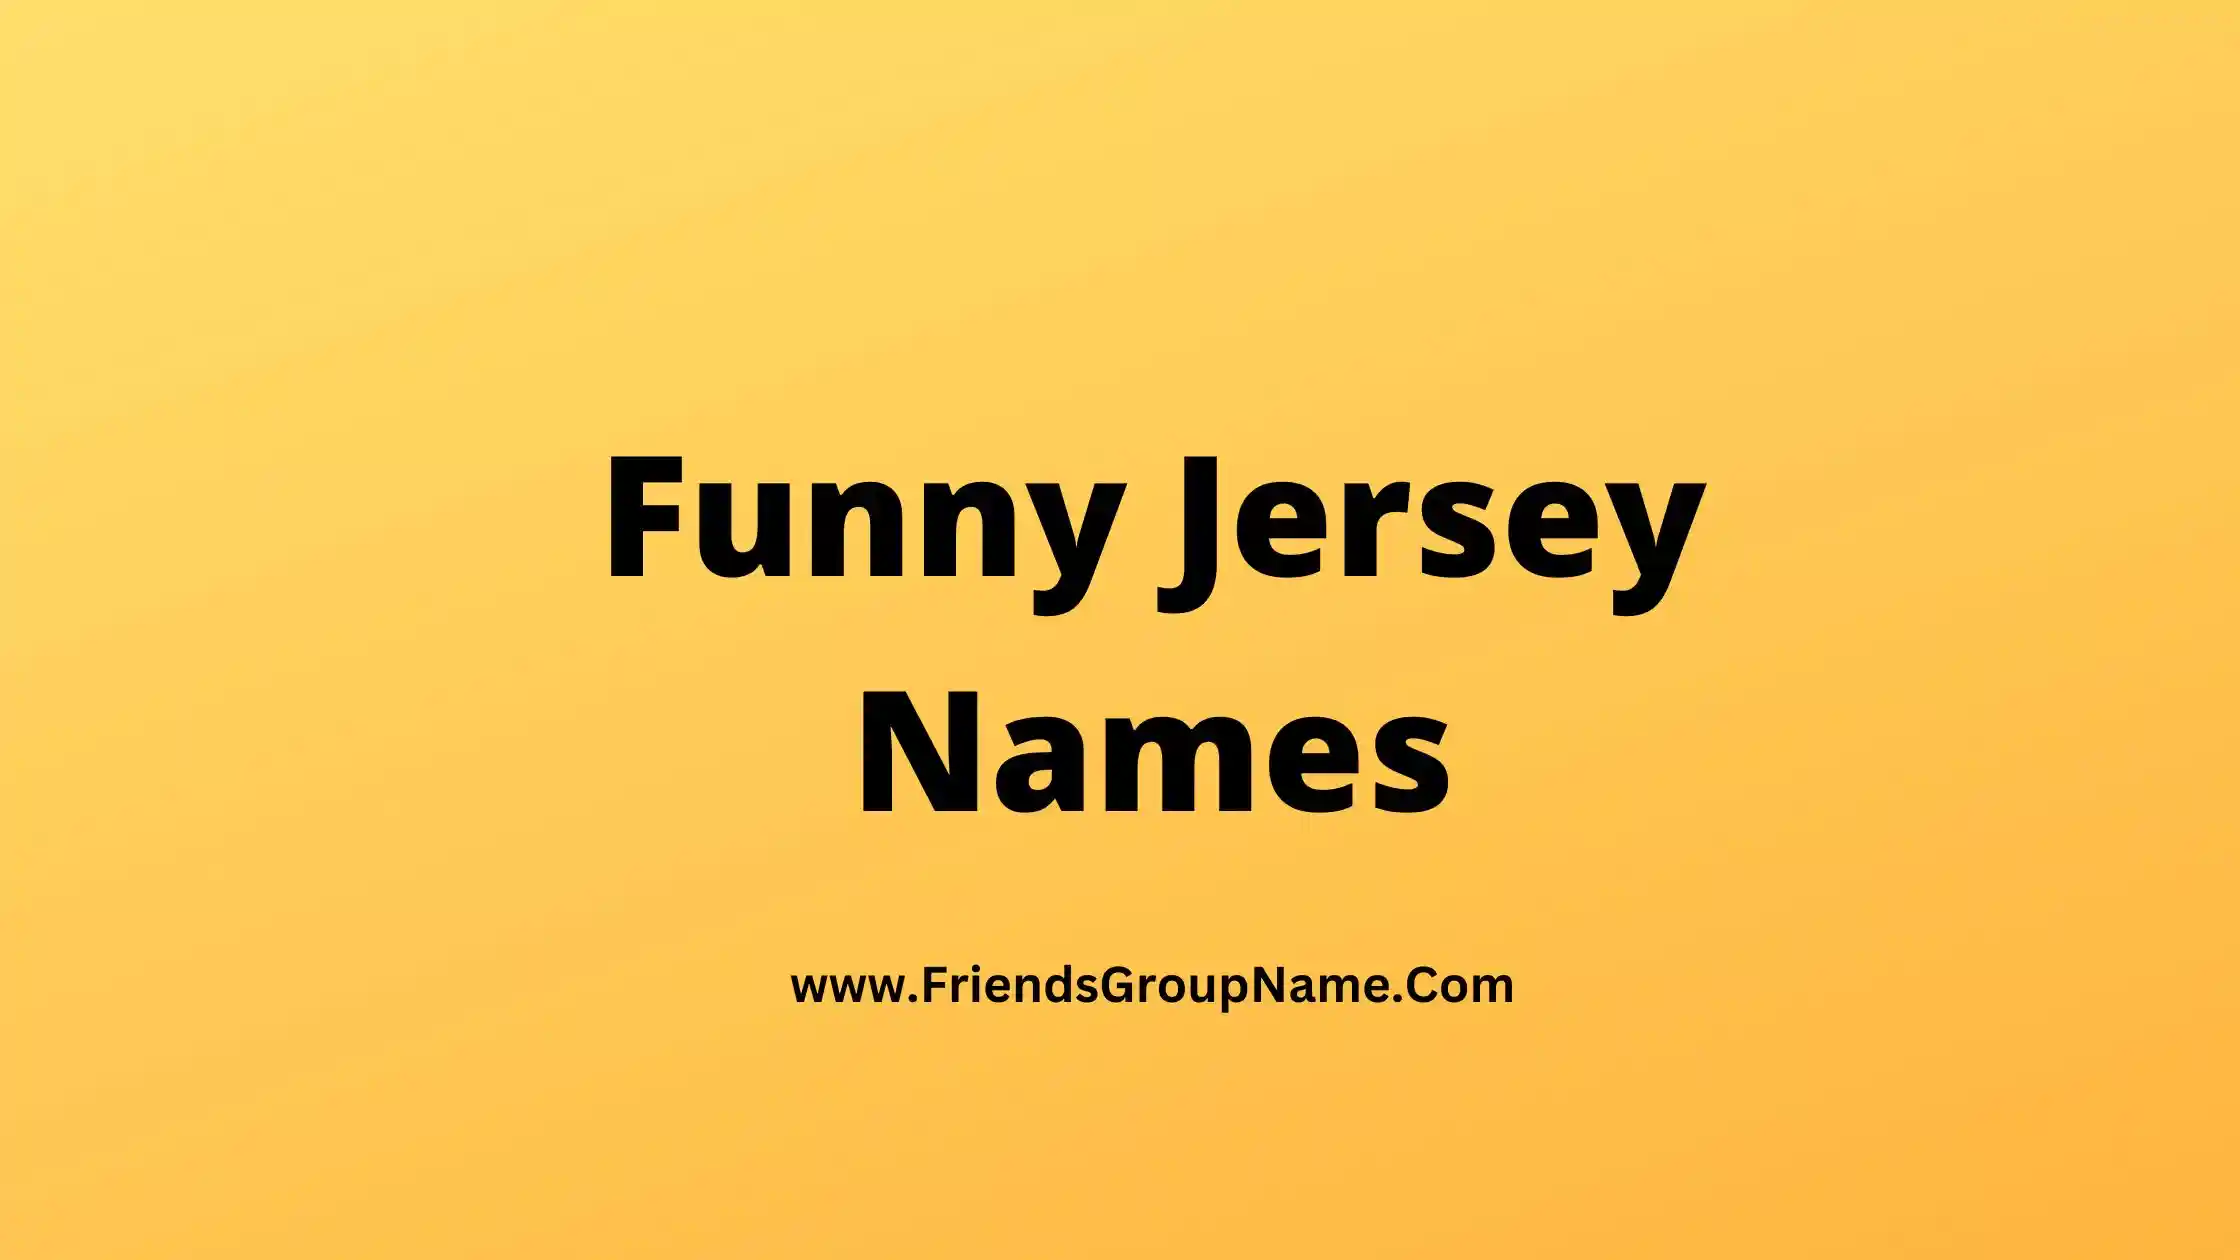 Funny Jersey Names